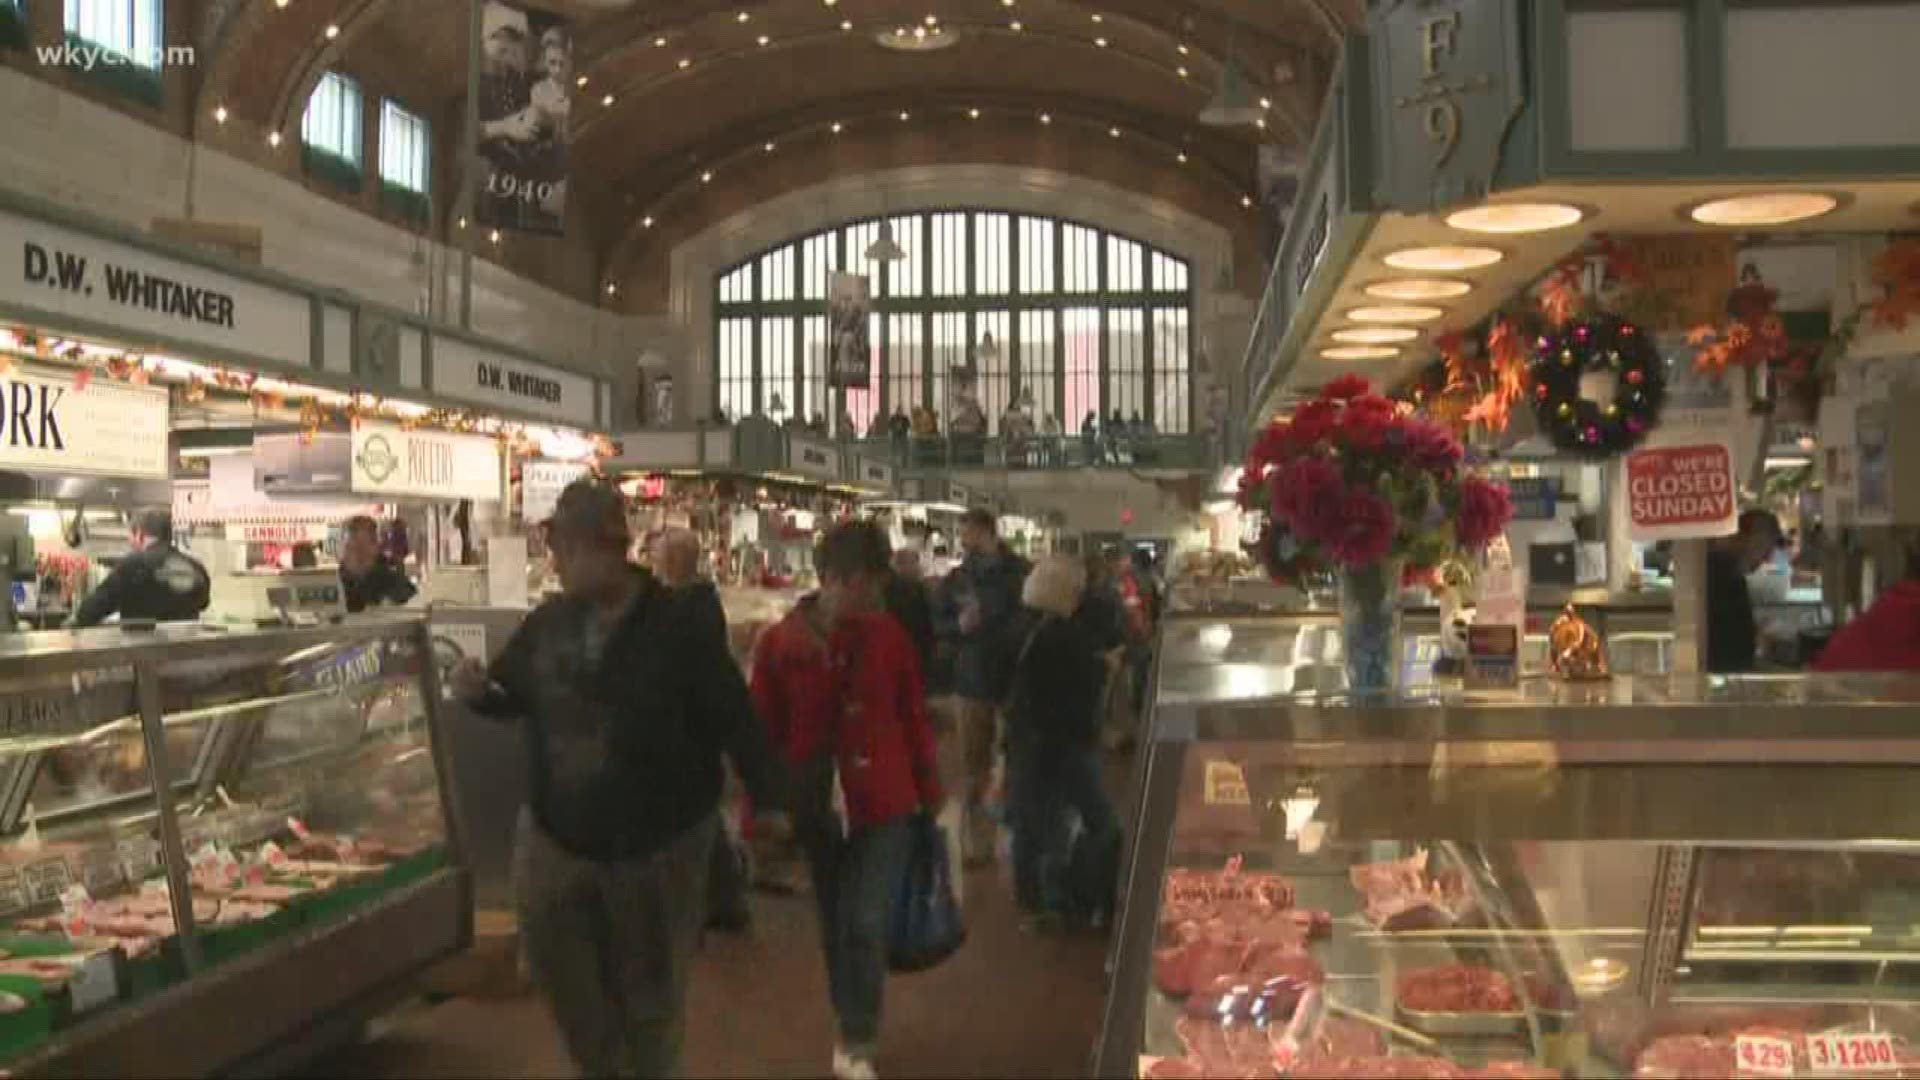 As vendors and shoppers cite a slew of problems, the city says it's taking action to make improvements. Mark Naymik reports.